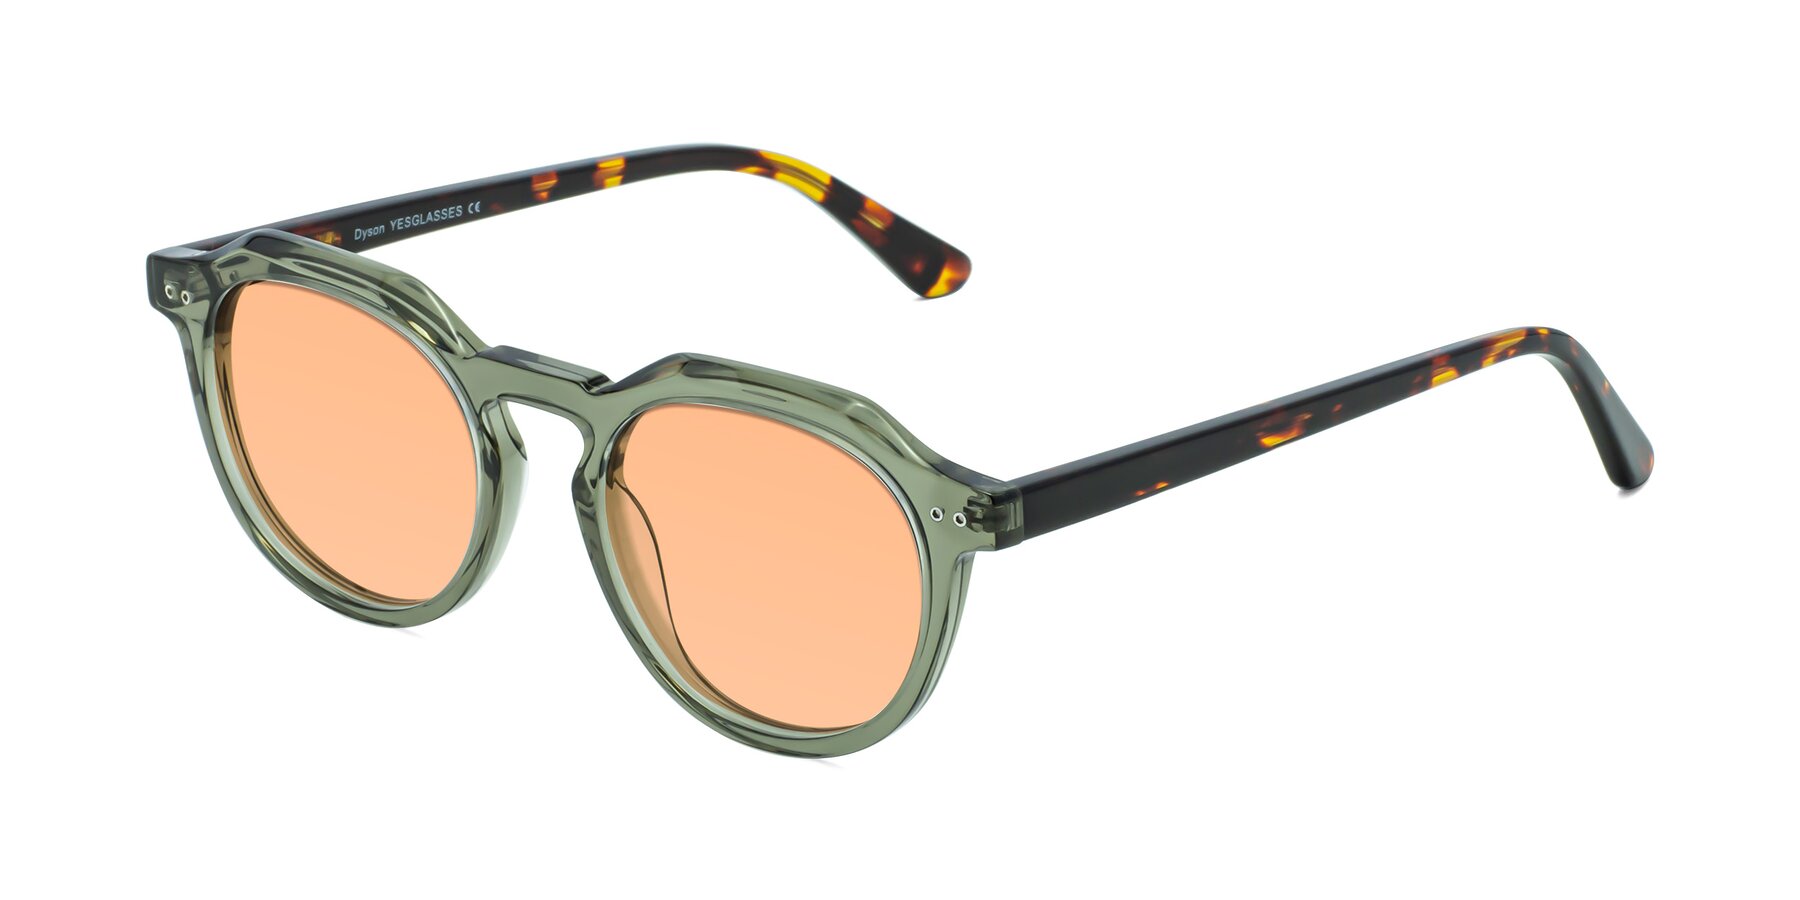 Angle of Dyson in Transparent Green-Tortoise with Light Orange Tinted Lenses